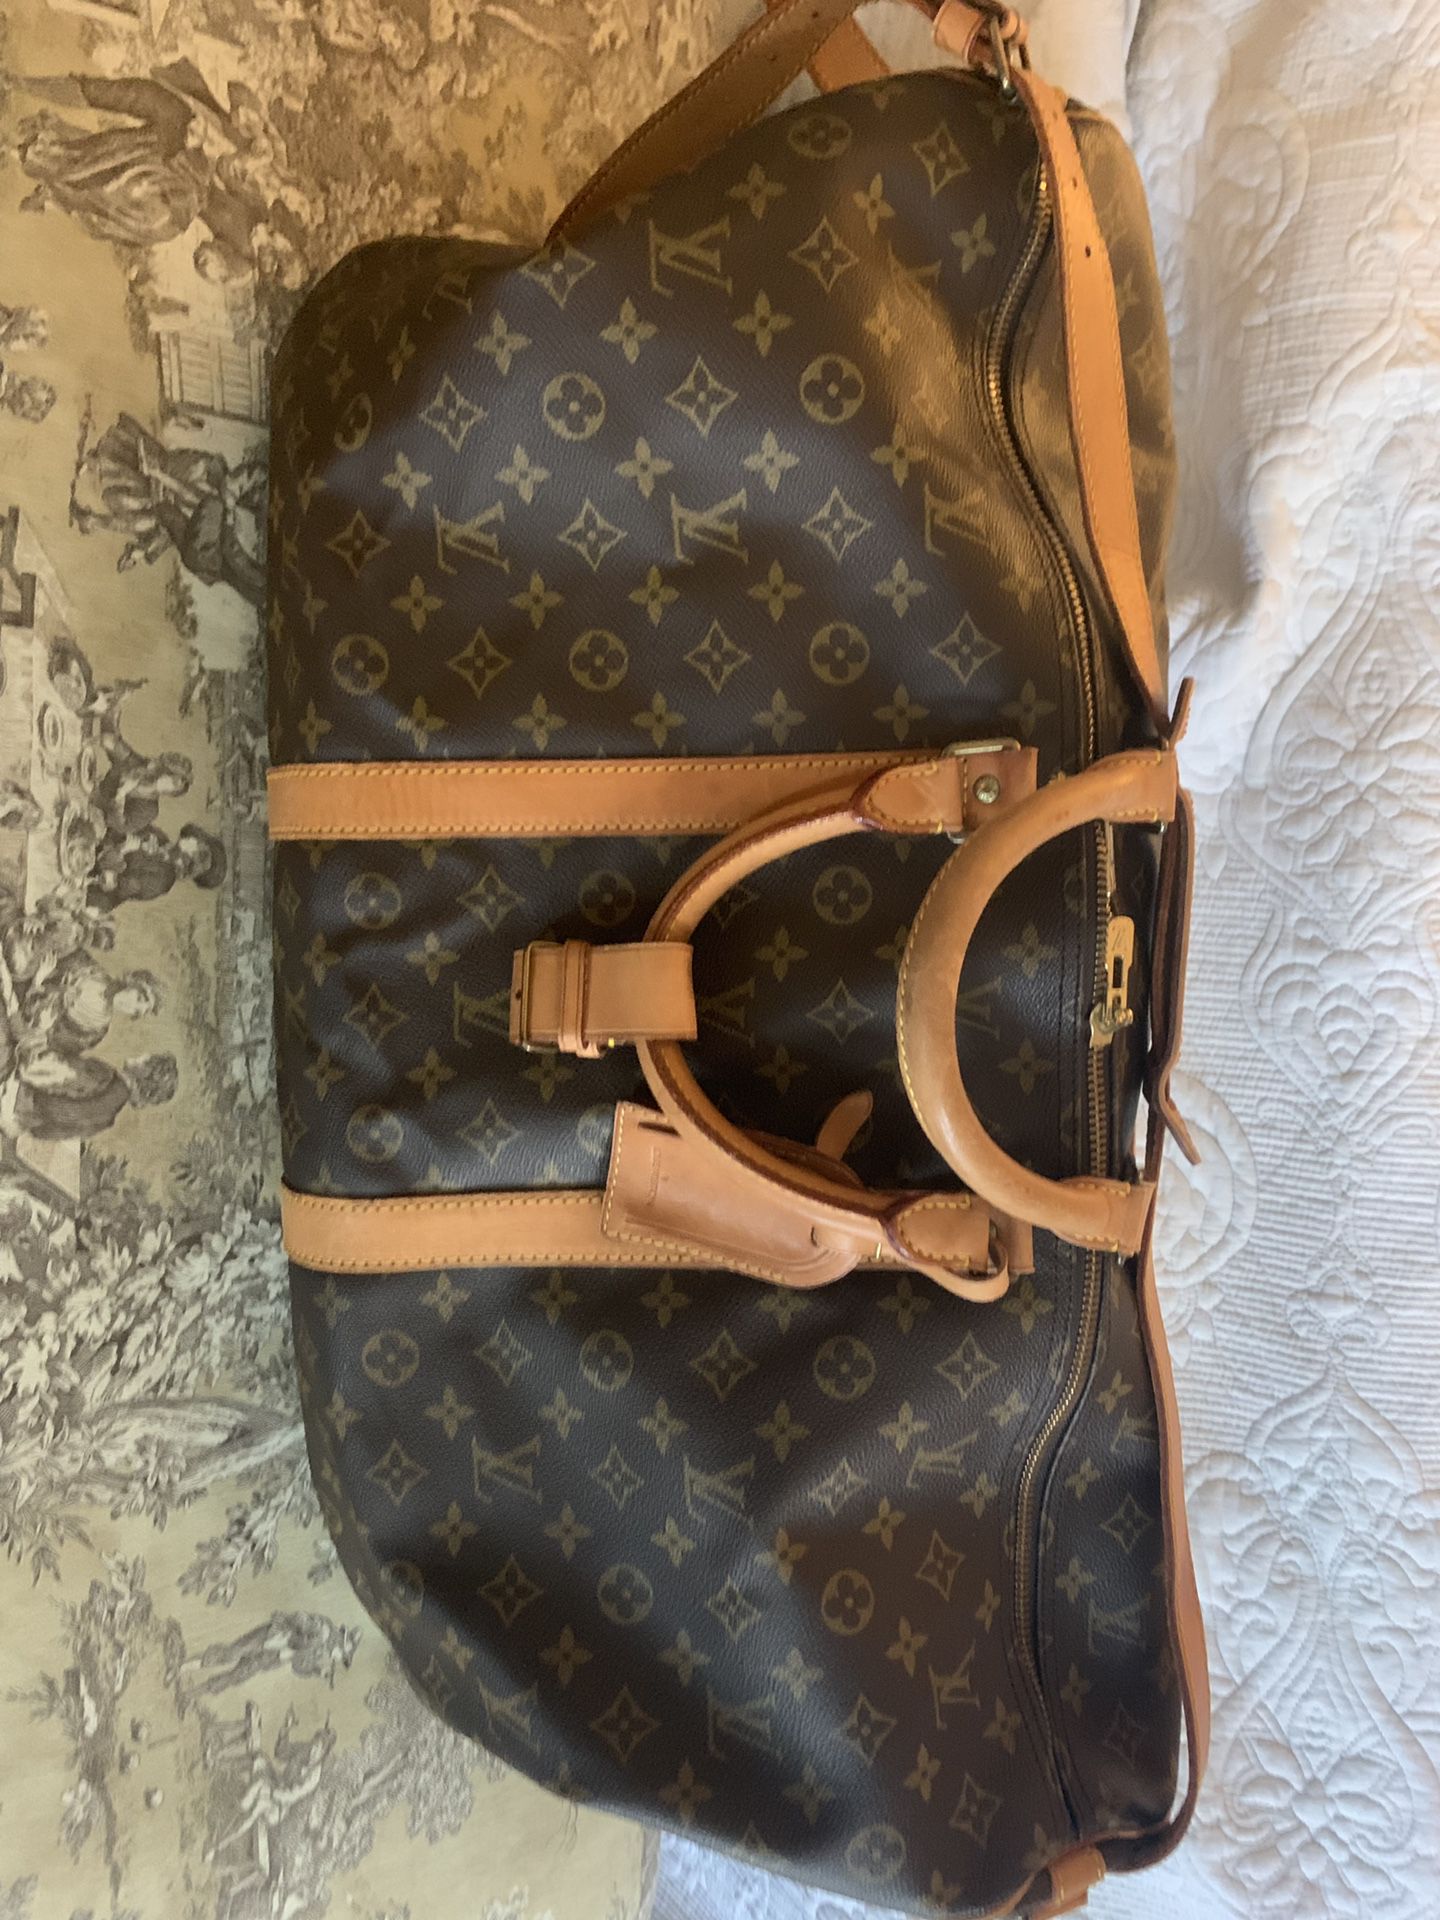 Authentic Louis Vuitton keepall 60.